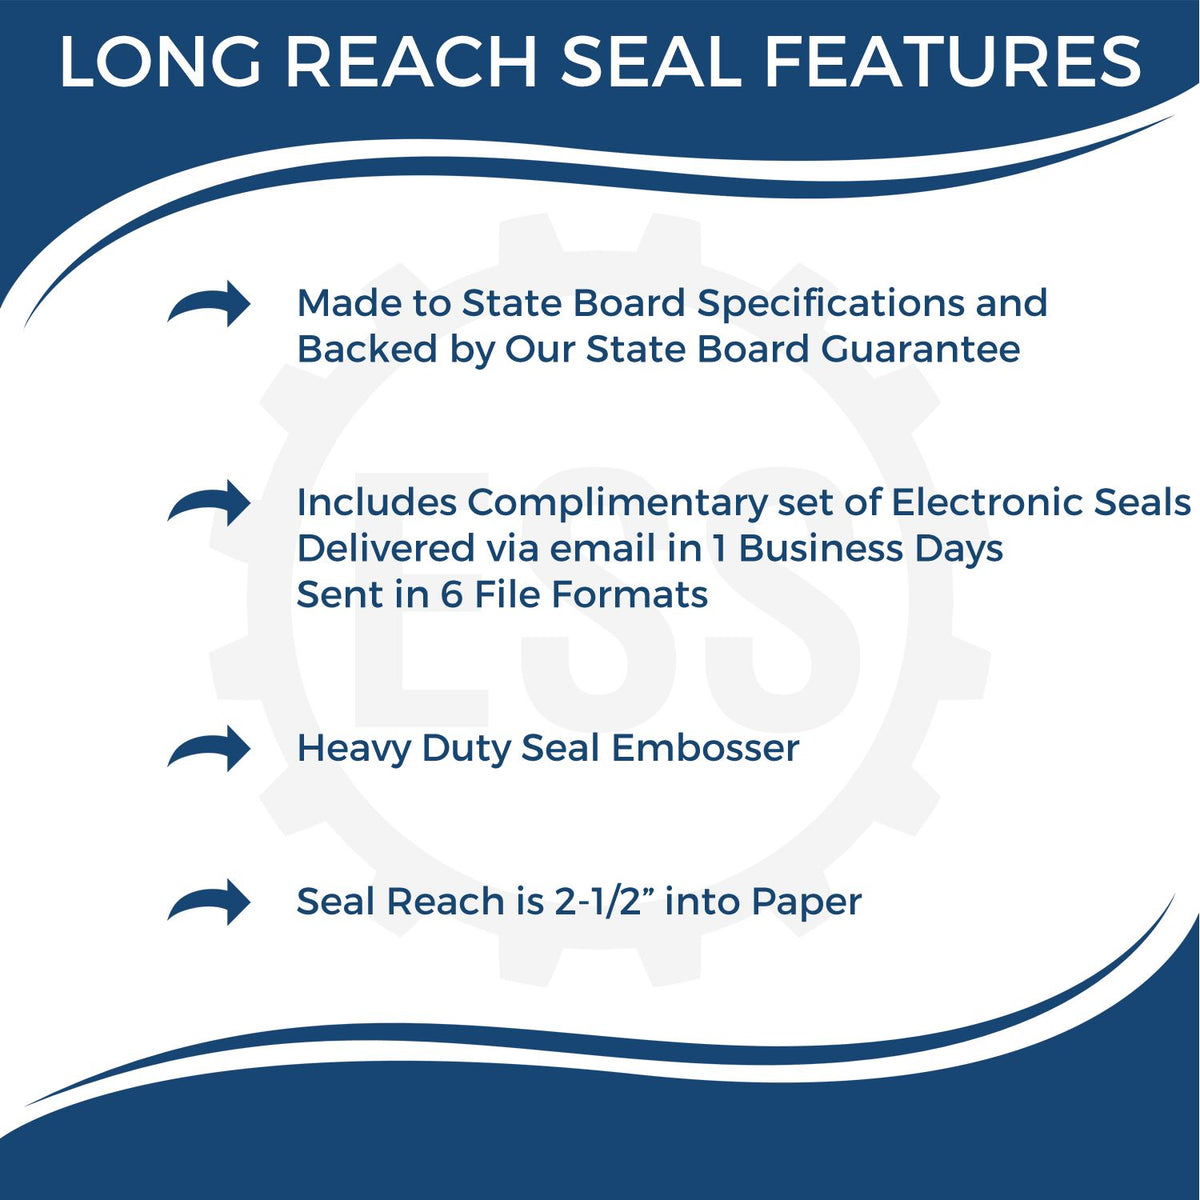 A picture of an infographic highlighting the selling points for the Long Reach Wisconsin Geology Seal